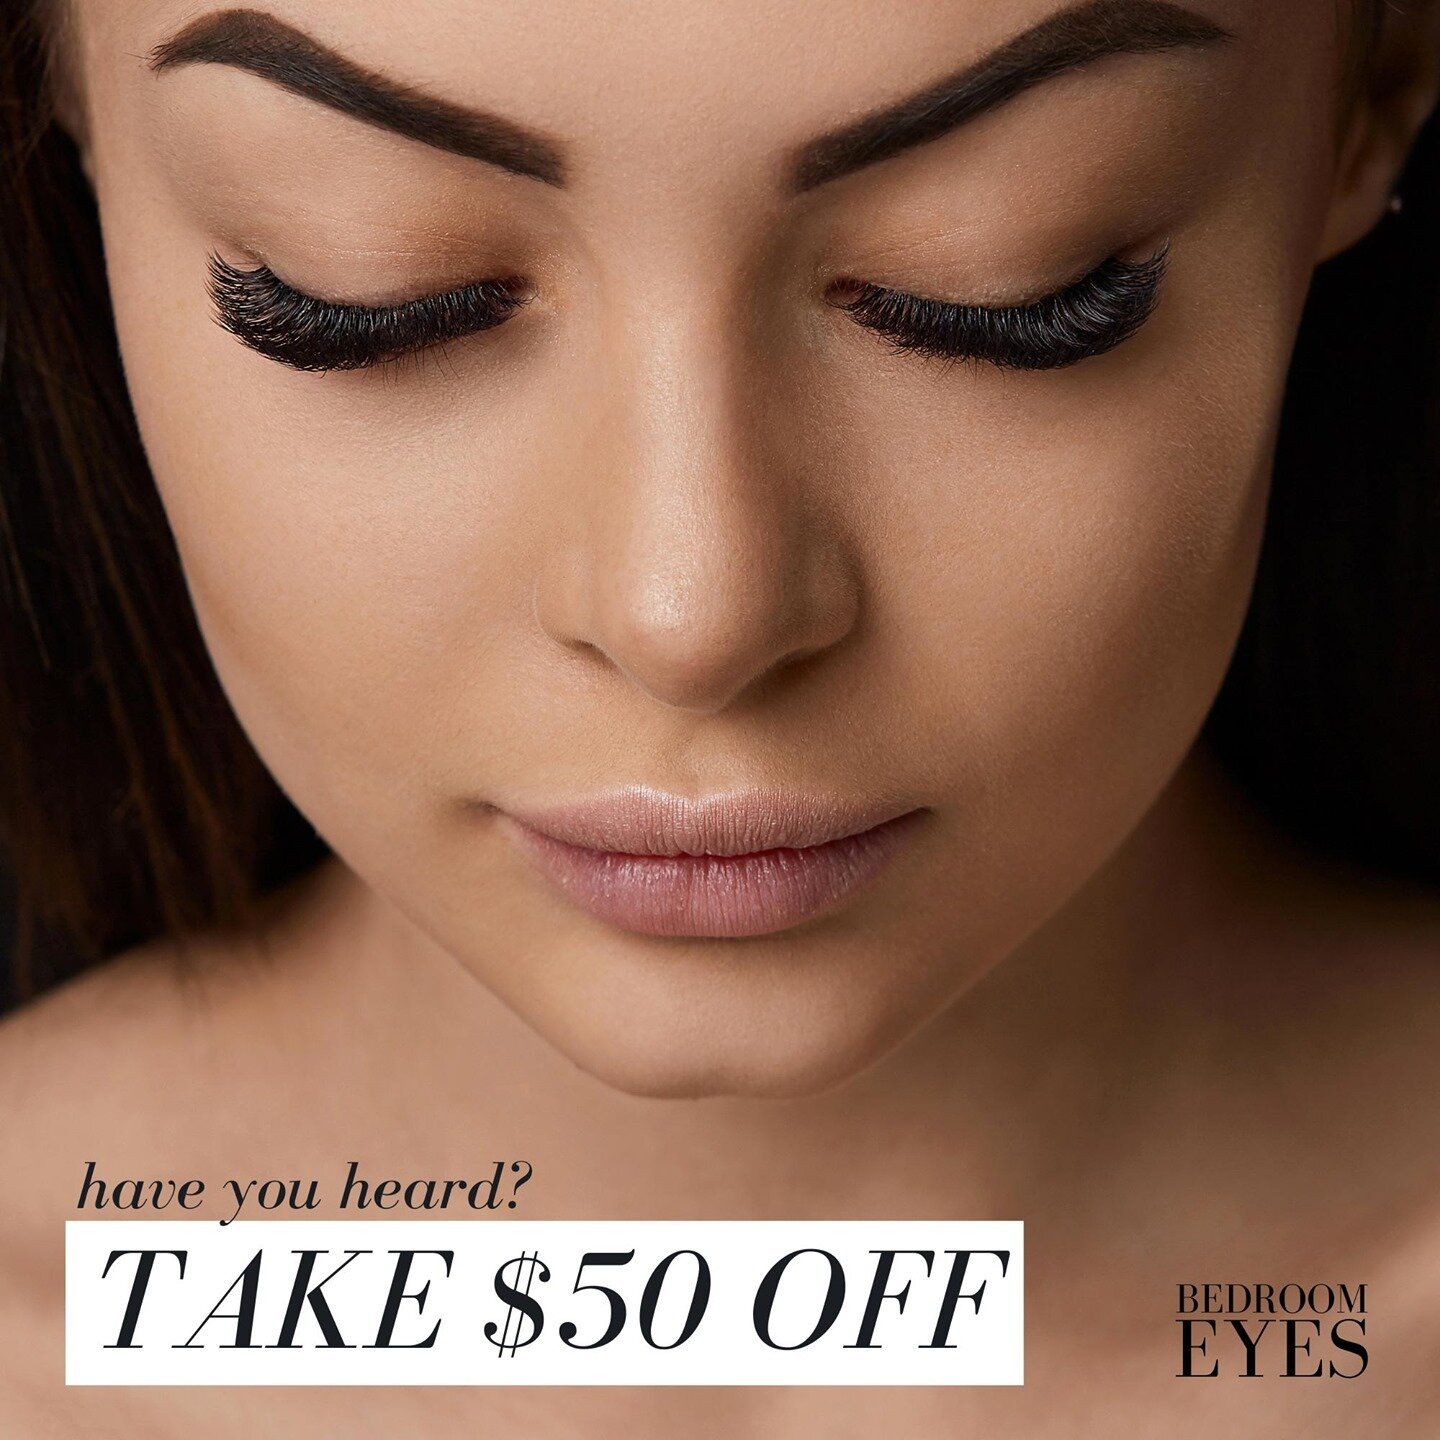 Have you heard? We're taking $50 OFF all full lash sets until the end of March! ✨⁠
⁠
This offer is available for all clients, not in conjunction with any other offer. ⁠
⁠
We have limited appointments available so be sure to book in early! ⁠
⁠
⁠
#bedr